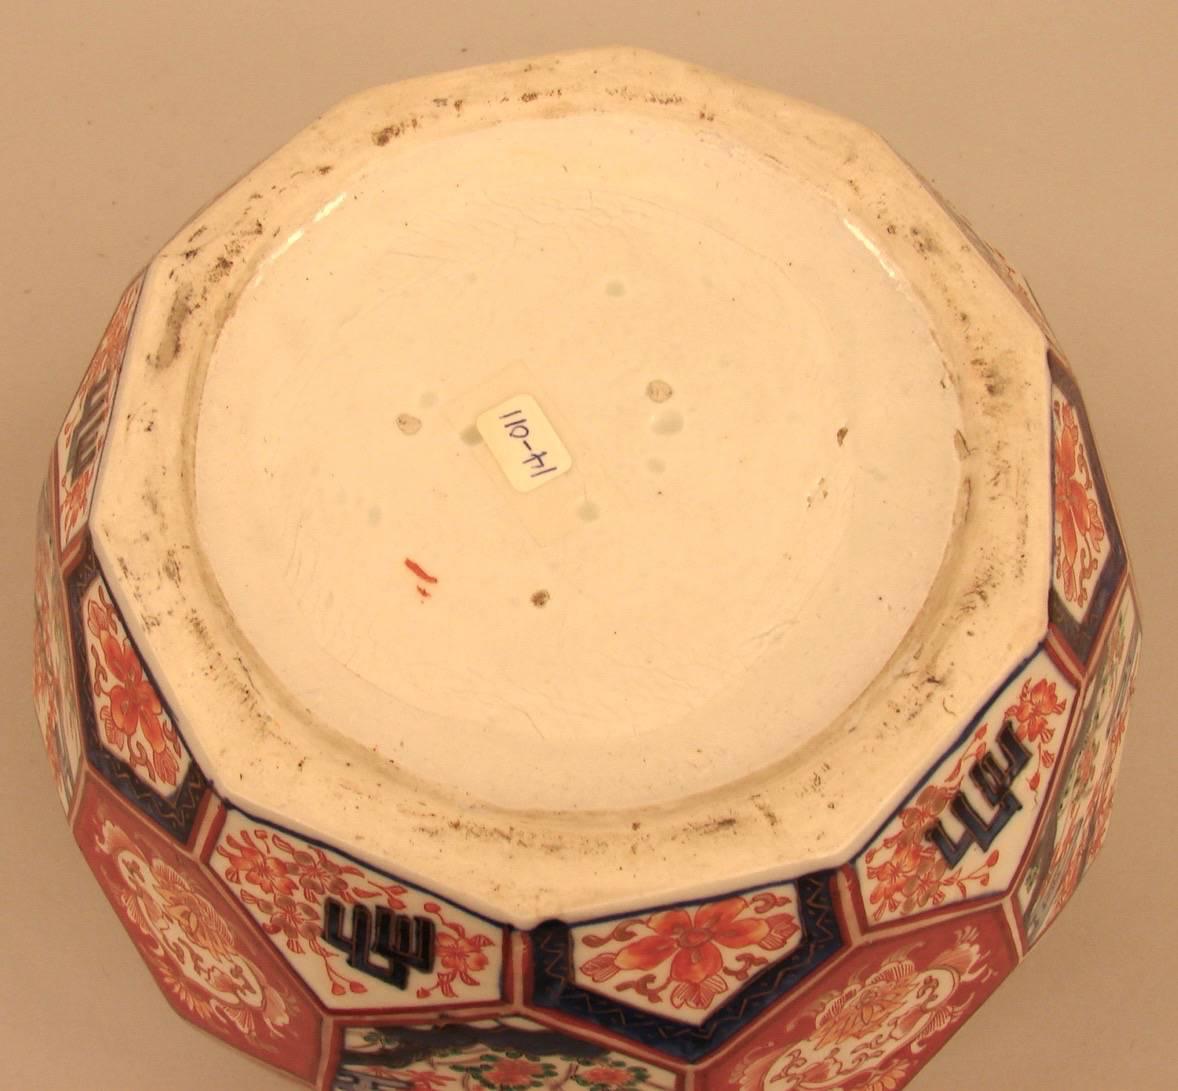 An unusual Japanese Meiji period planter of faceted form, decorated overall in typical Imari colors with foliate designs.